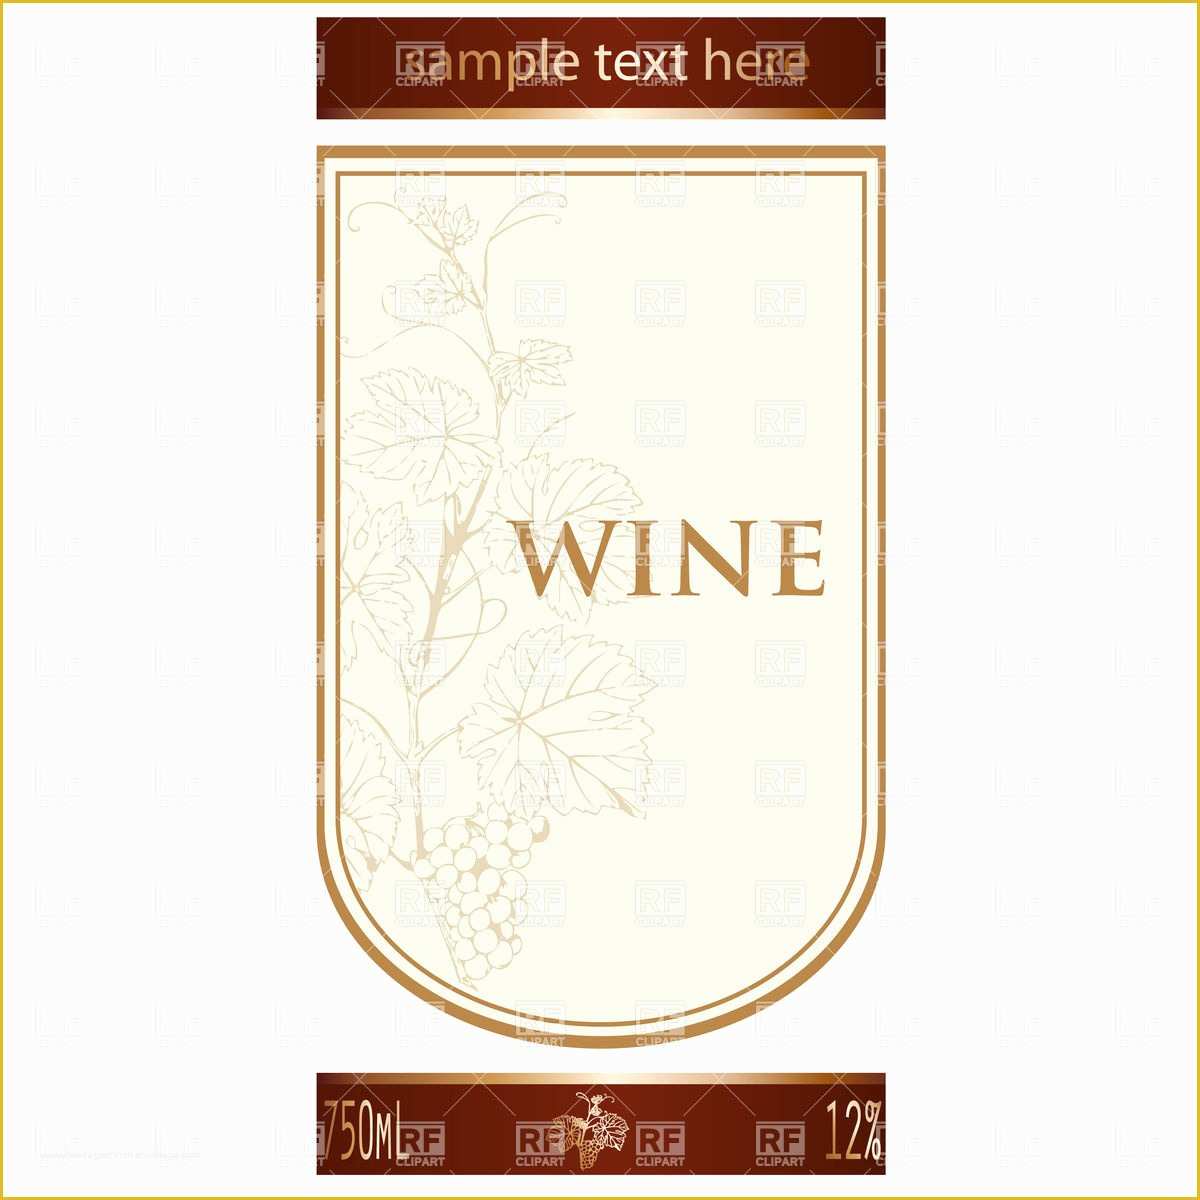 Wine Label Design Templates Free Of Template Of Wine Label with Vine and Bunch Of Grapes